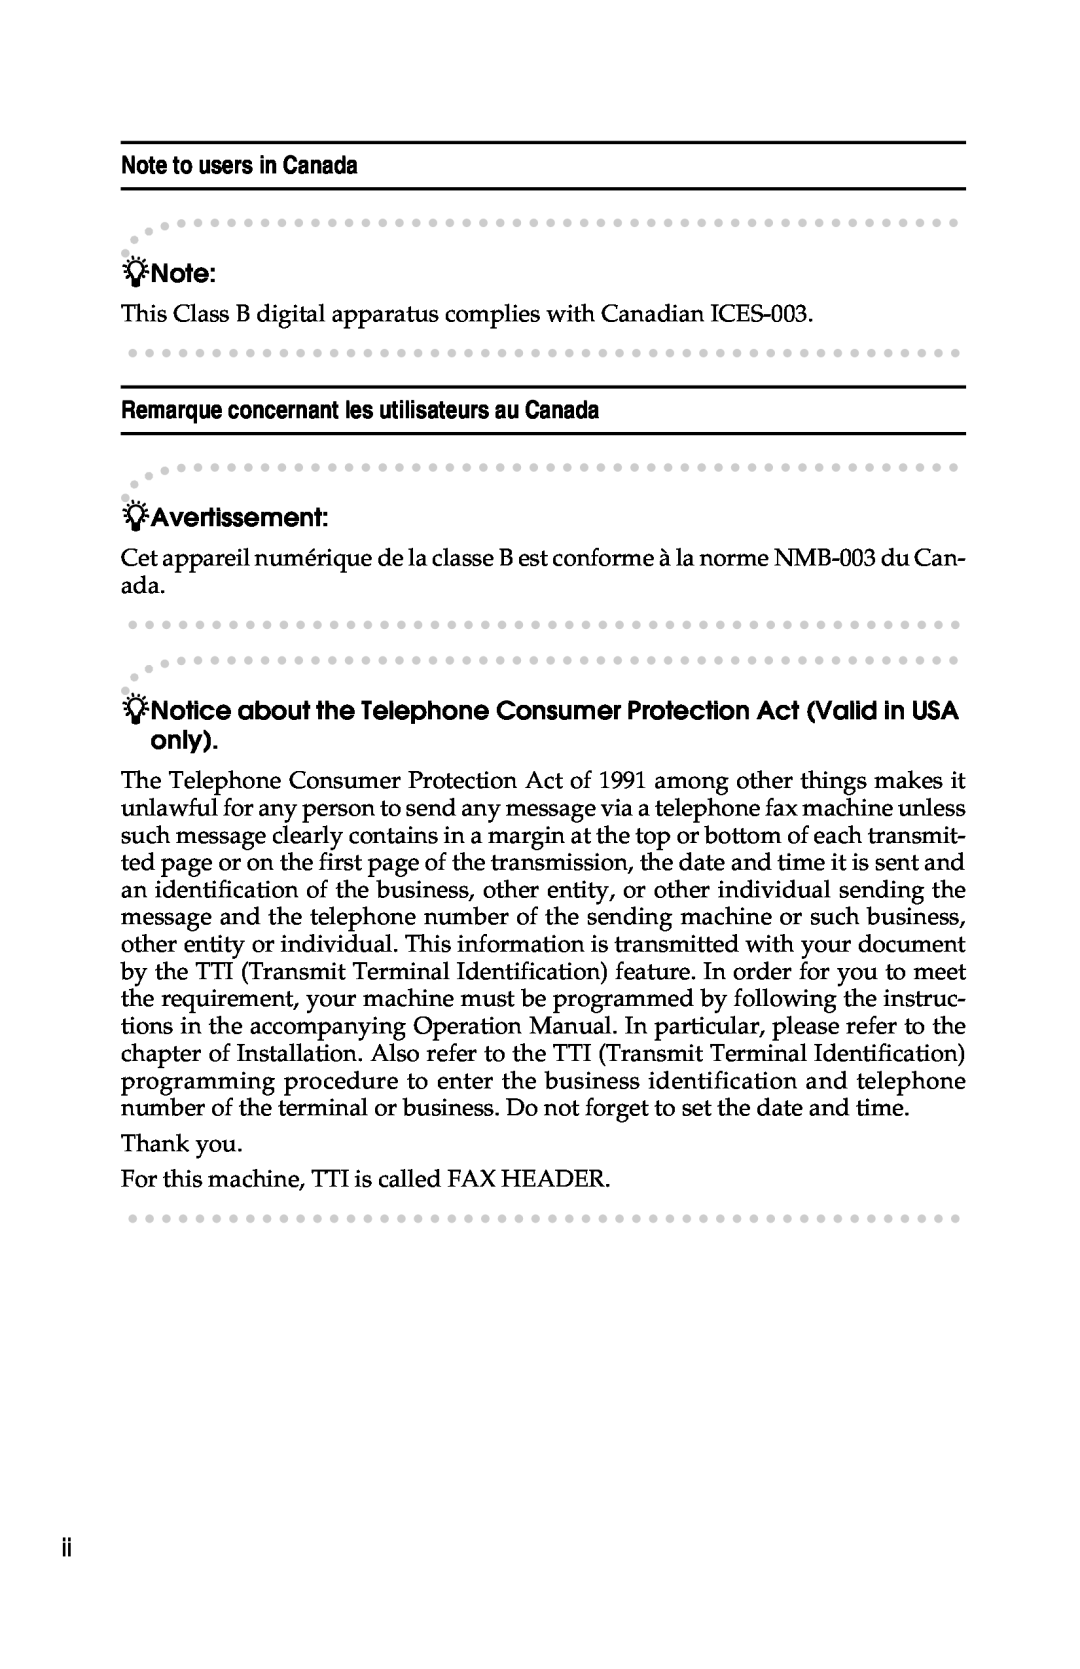 Savin G1619 manual Note to users in Canada, Remarque concernant les utilisateurs au Canada 